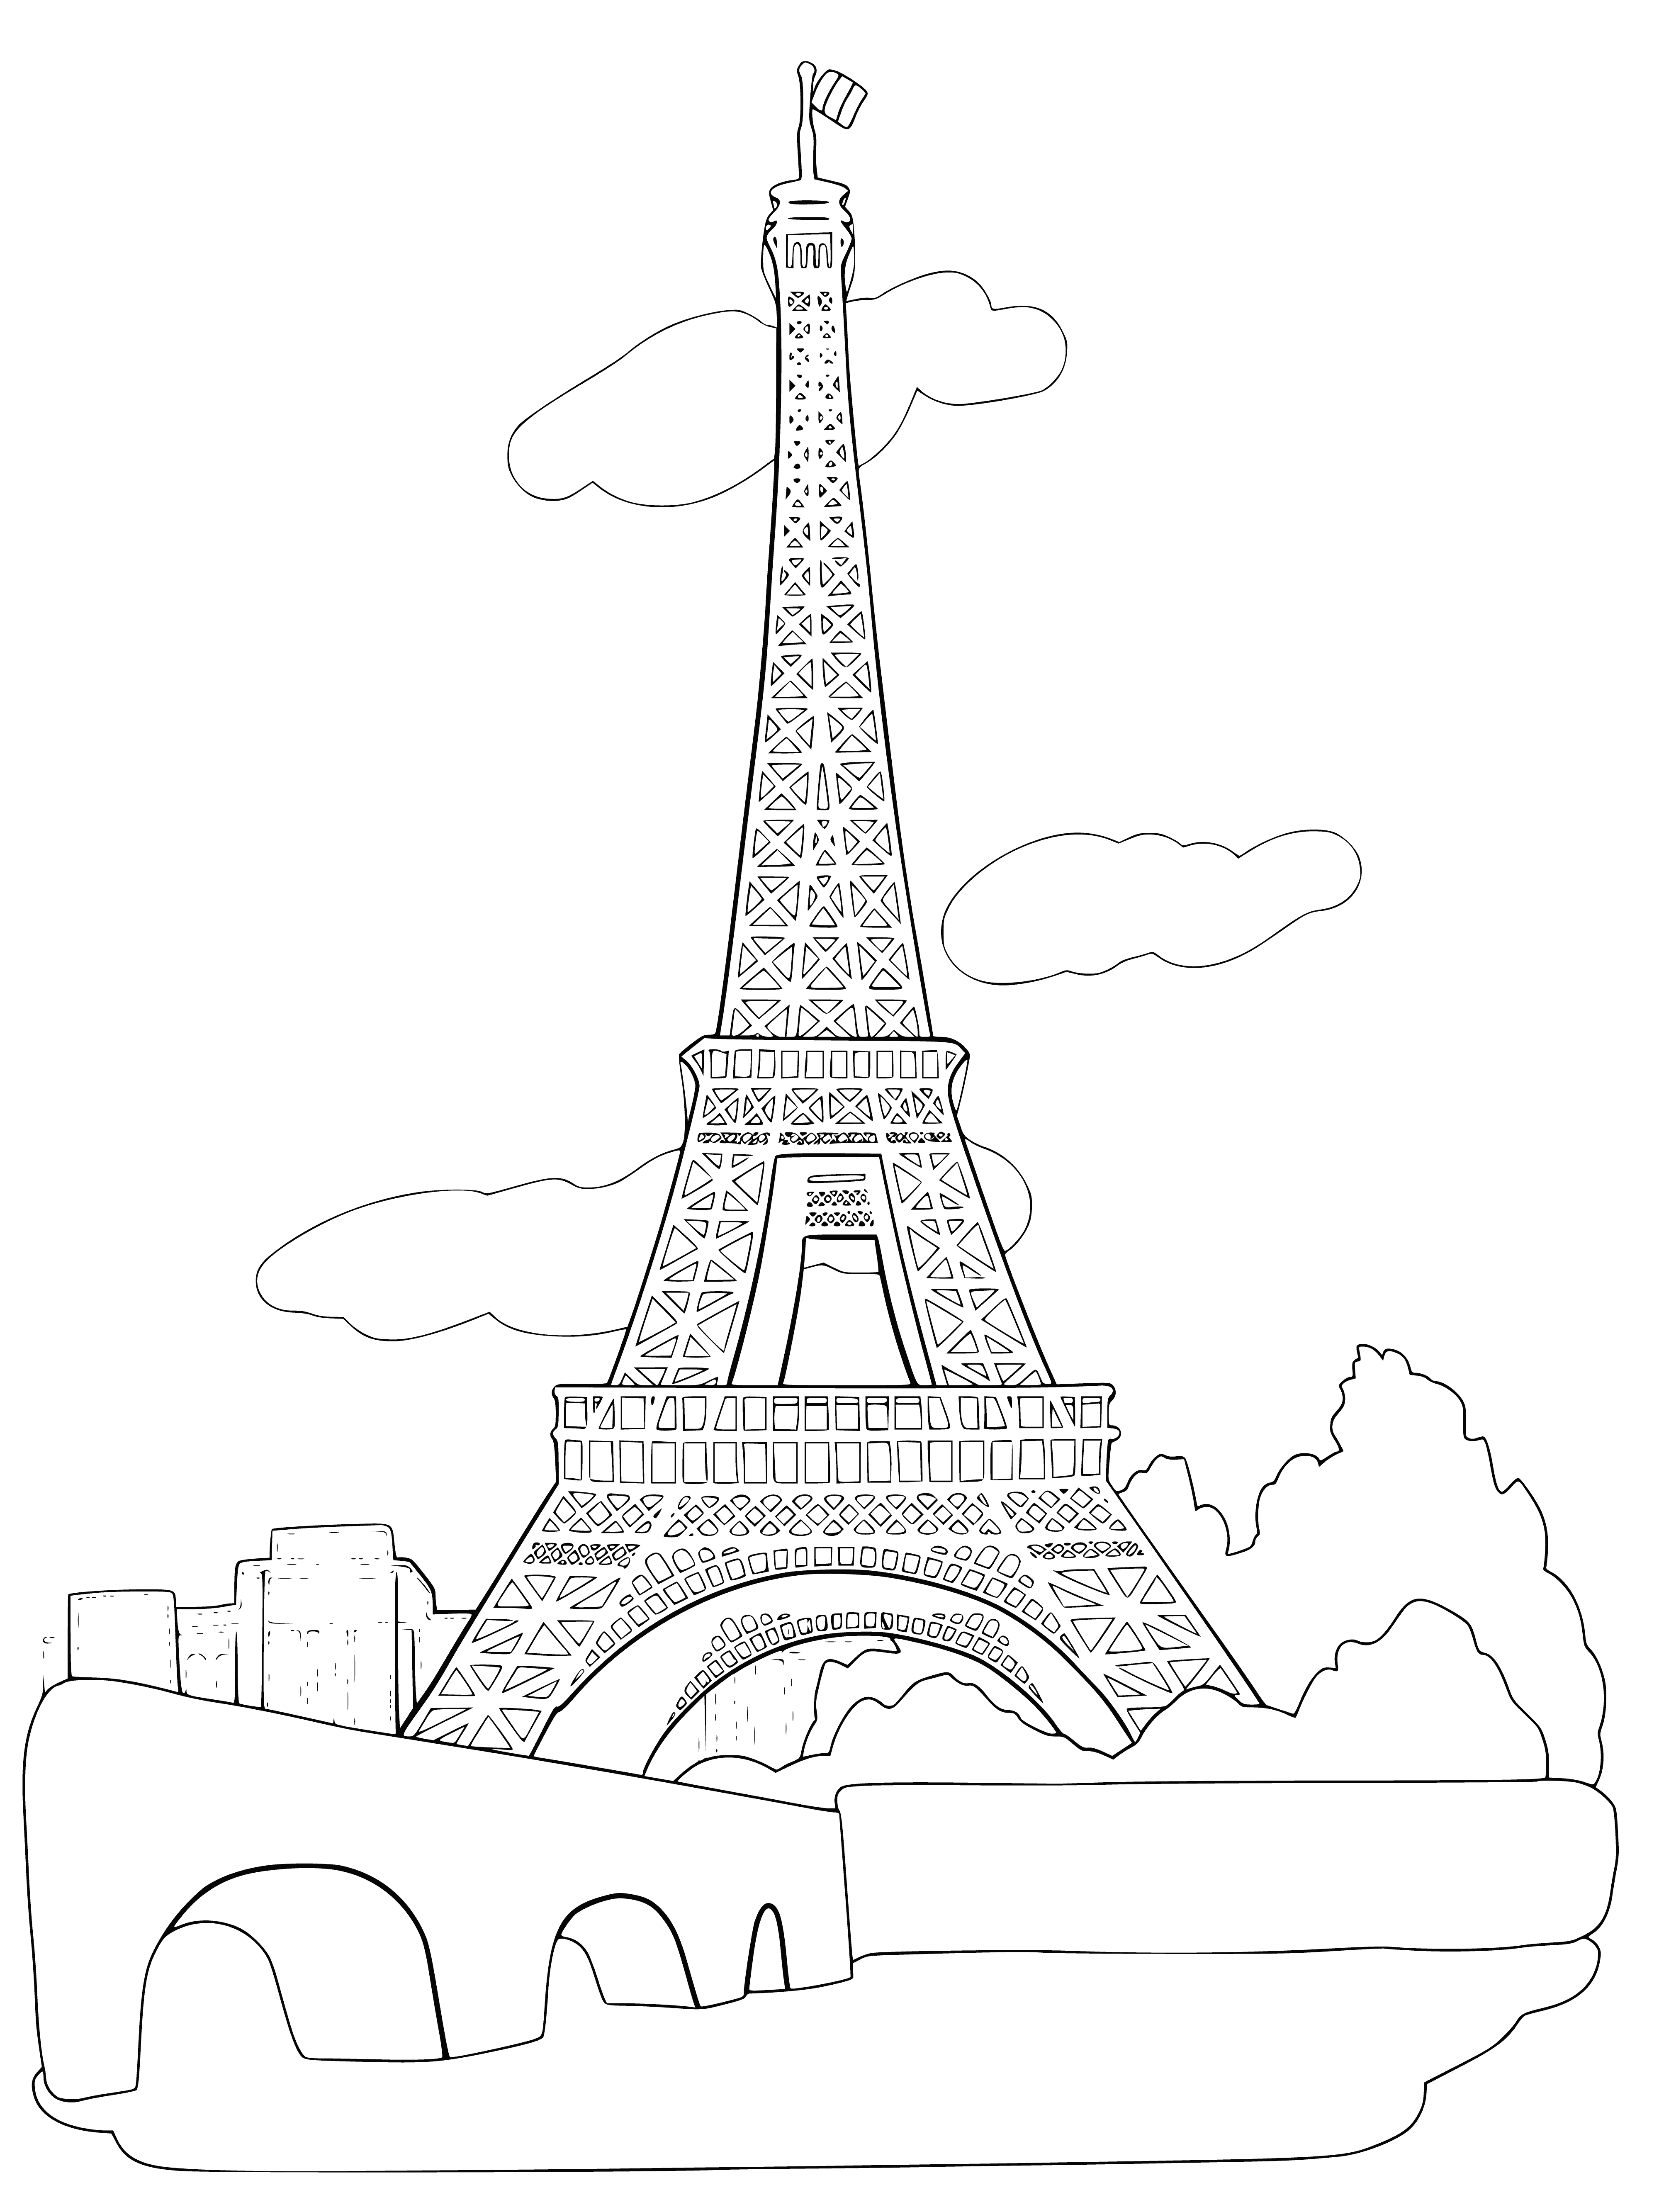 Eiffel Tower in Paris. France coloring page